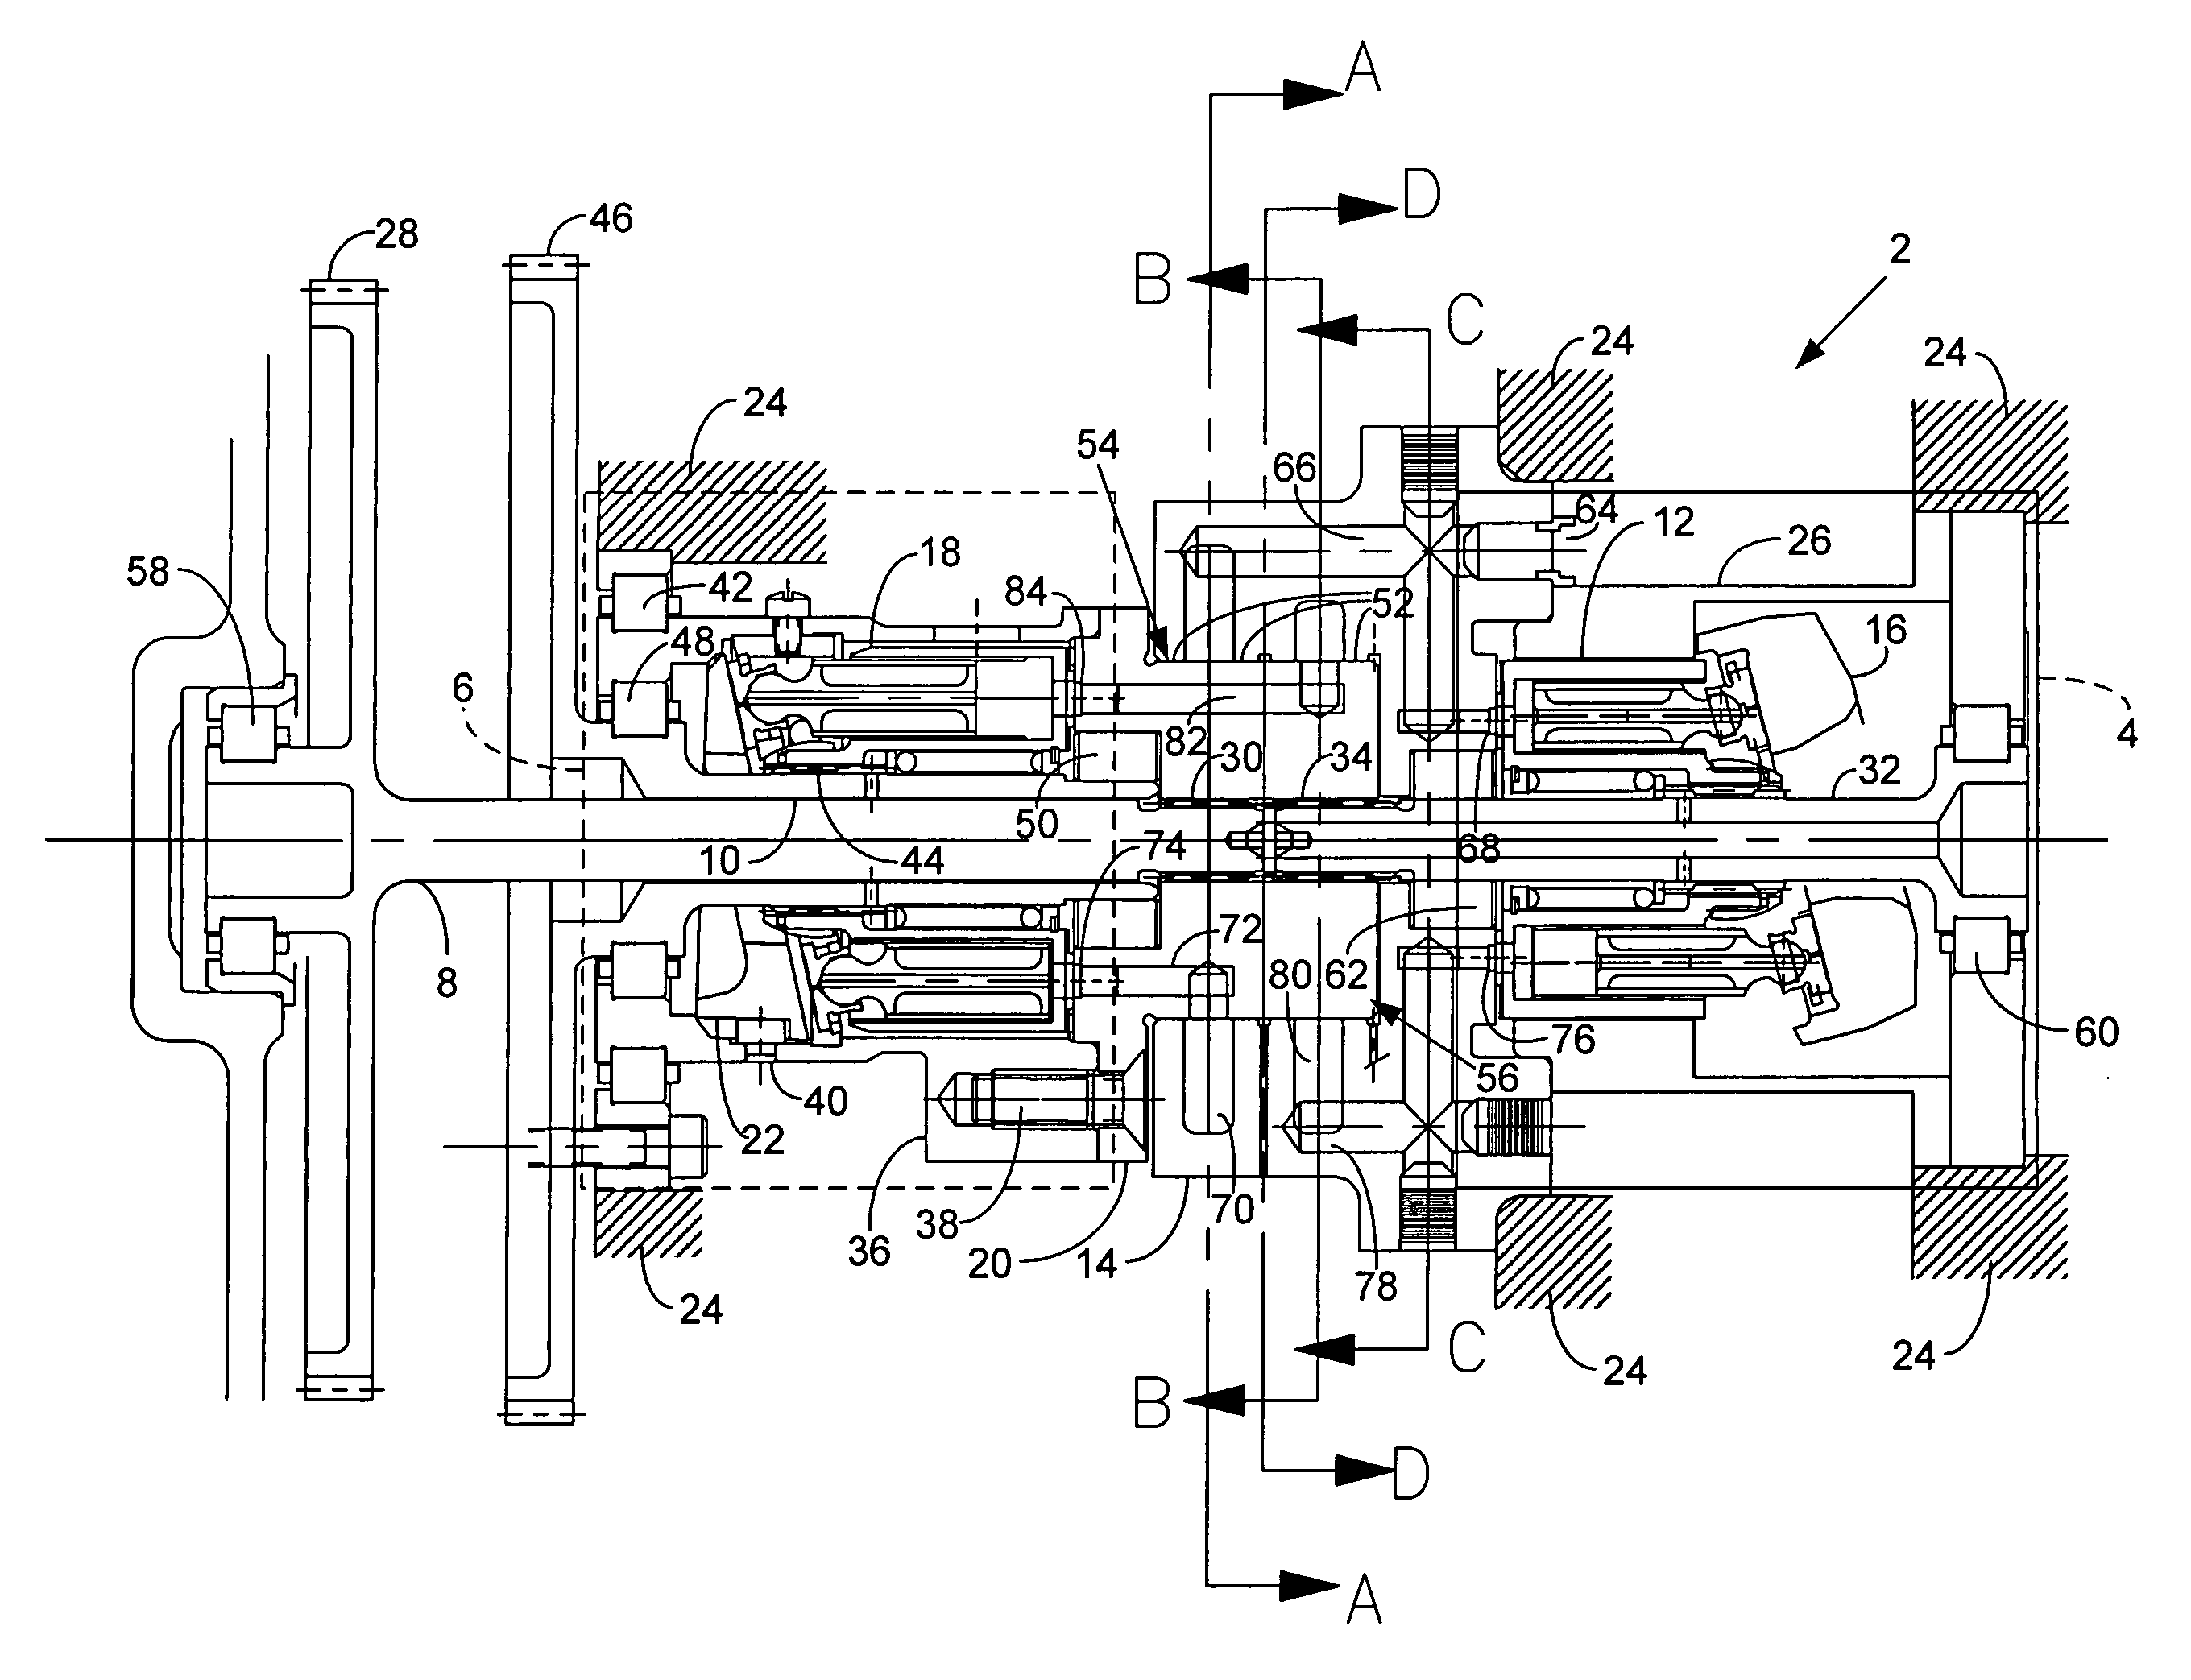 Hydraulic differential for integrated drive generator